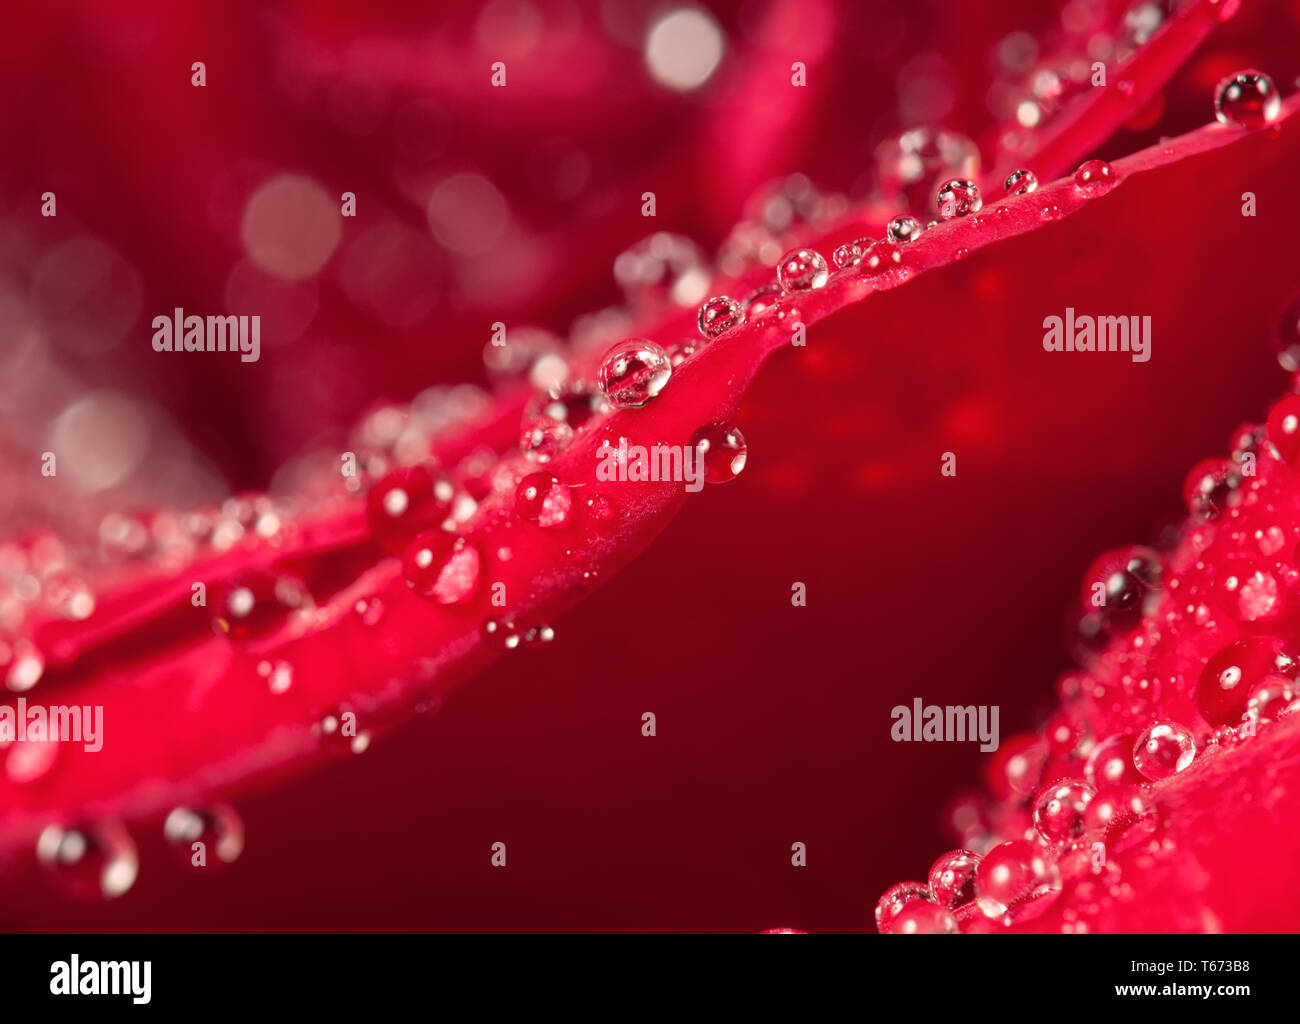 Dew drops on rose petal macro view. Elegance floral romantic background for Valentines or birthday Stock Photo